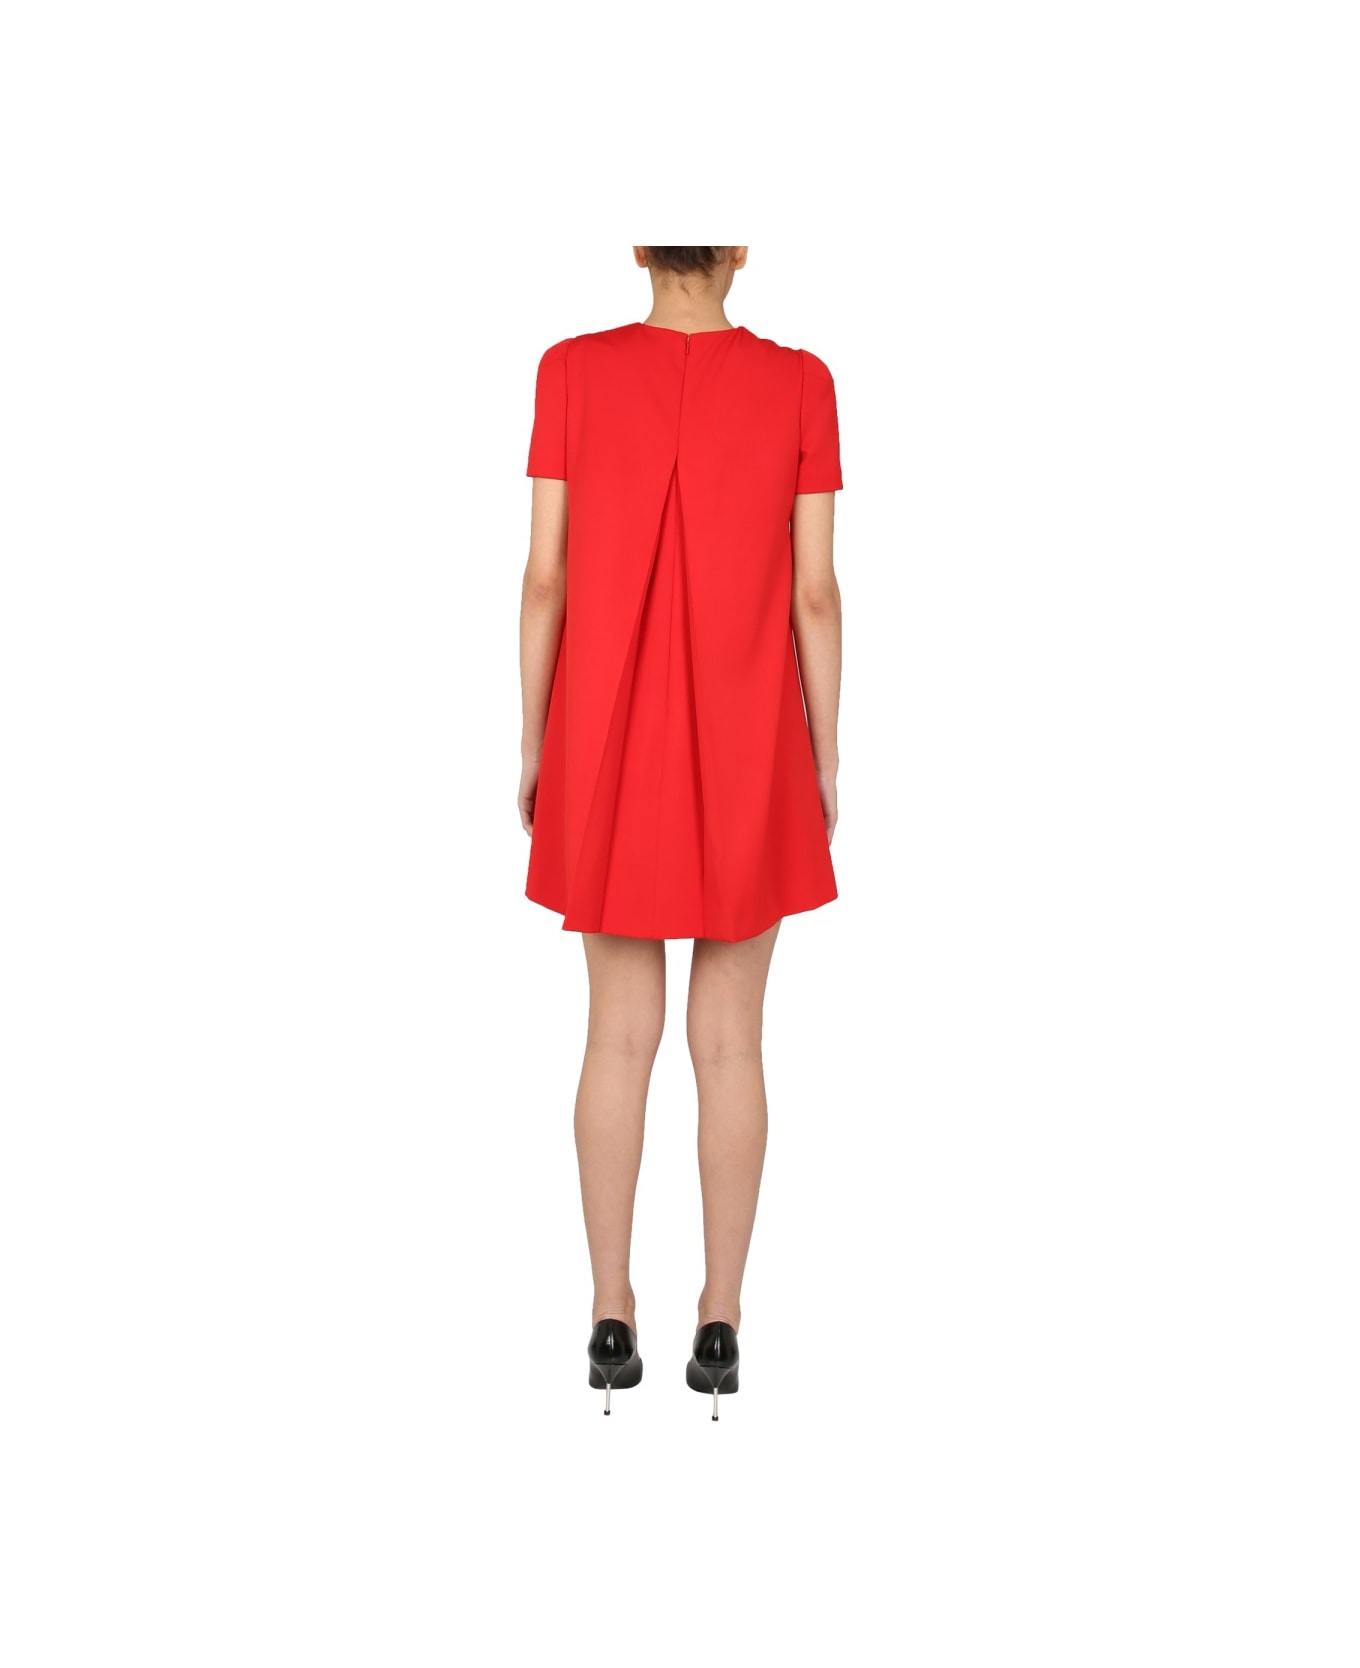 Alexander McQueen Dress With Cape - RED